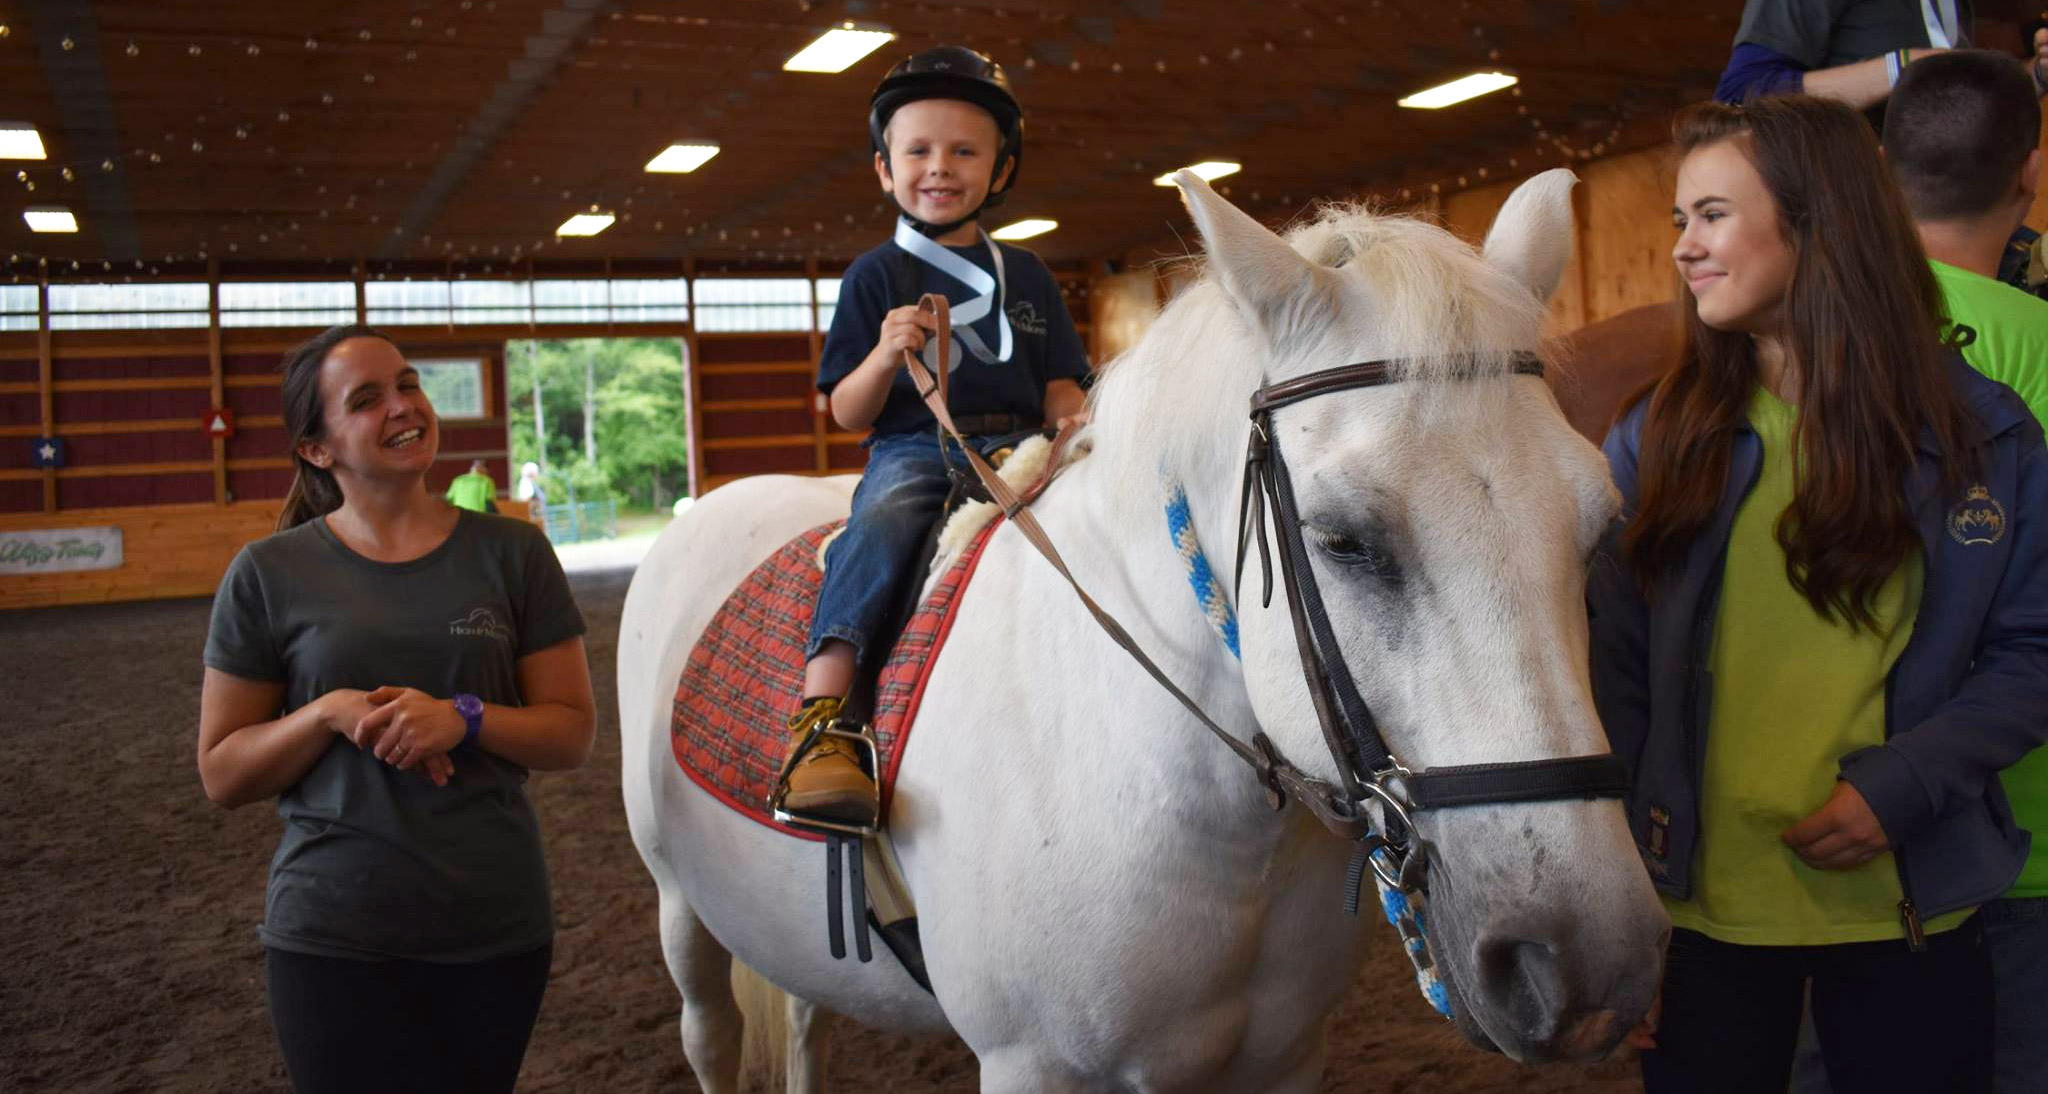 A young boy smiling on the back of a white pony with a woman smiling on the left and a girl on the right in the indoor ring at High & Mighty farm